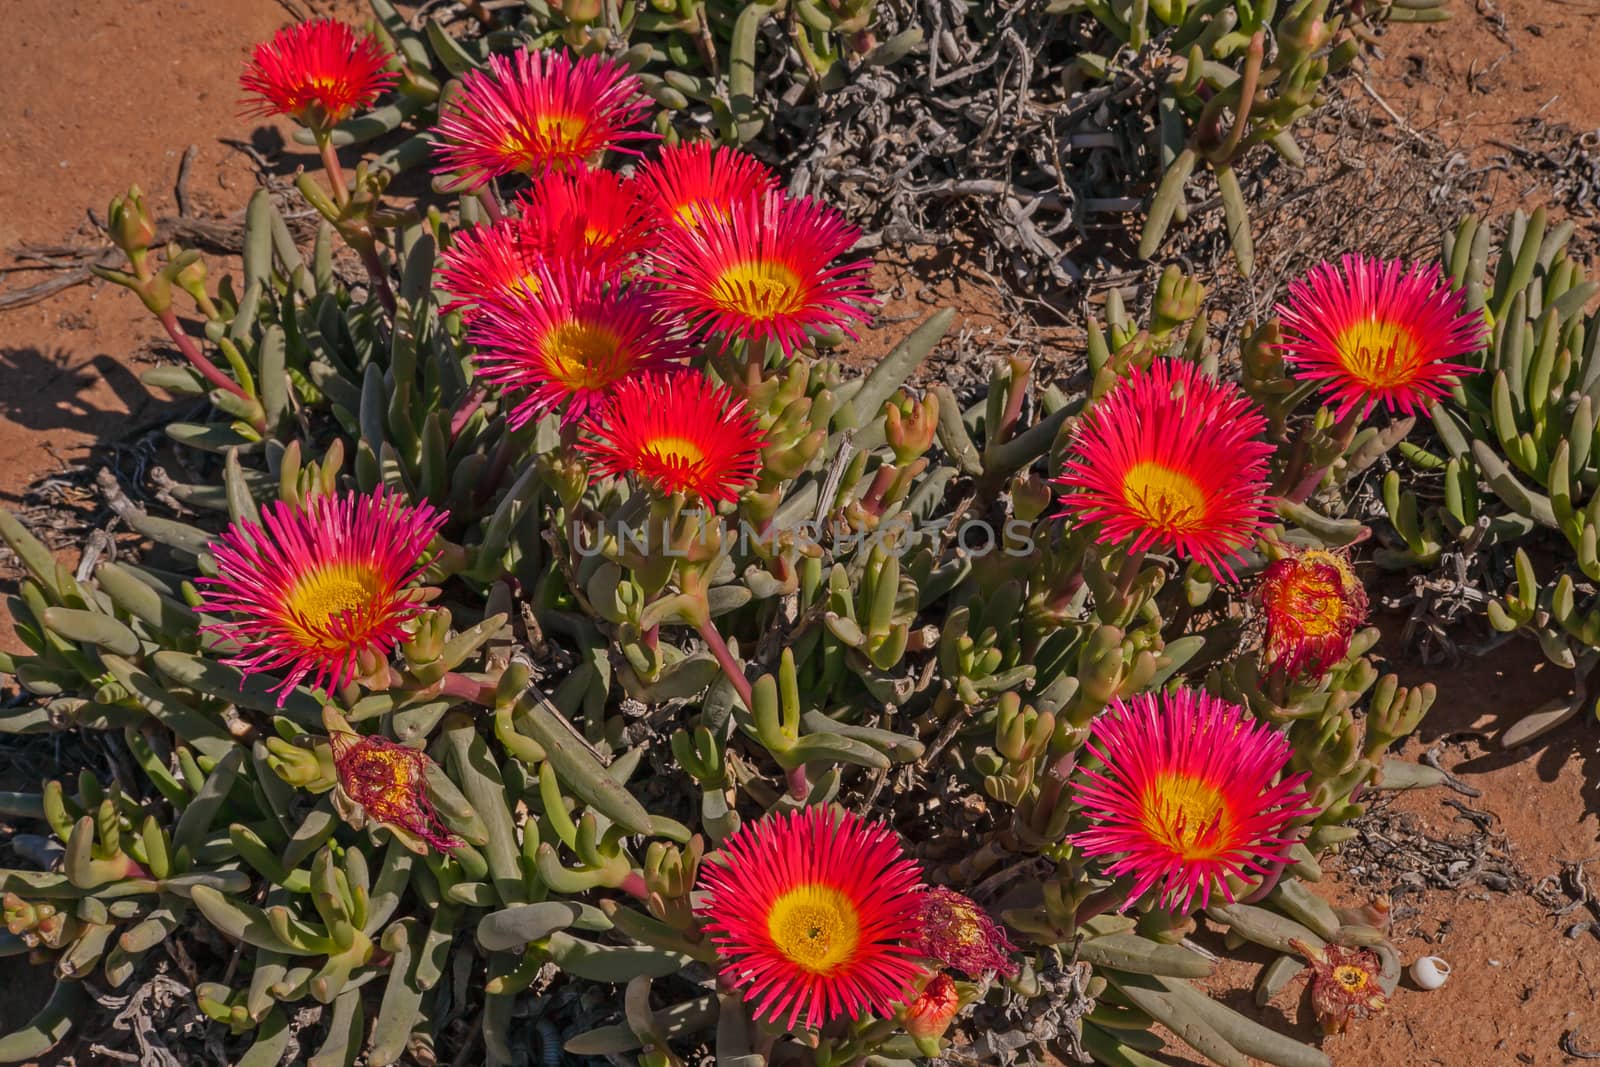 A plant of the Giant Mat Vygie (Jordaaniella spongiosa) displaying several large bright flowers of the forms part of the Spring flower display of the Namaqualand region in South Africa.